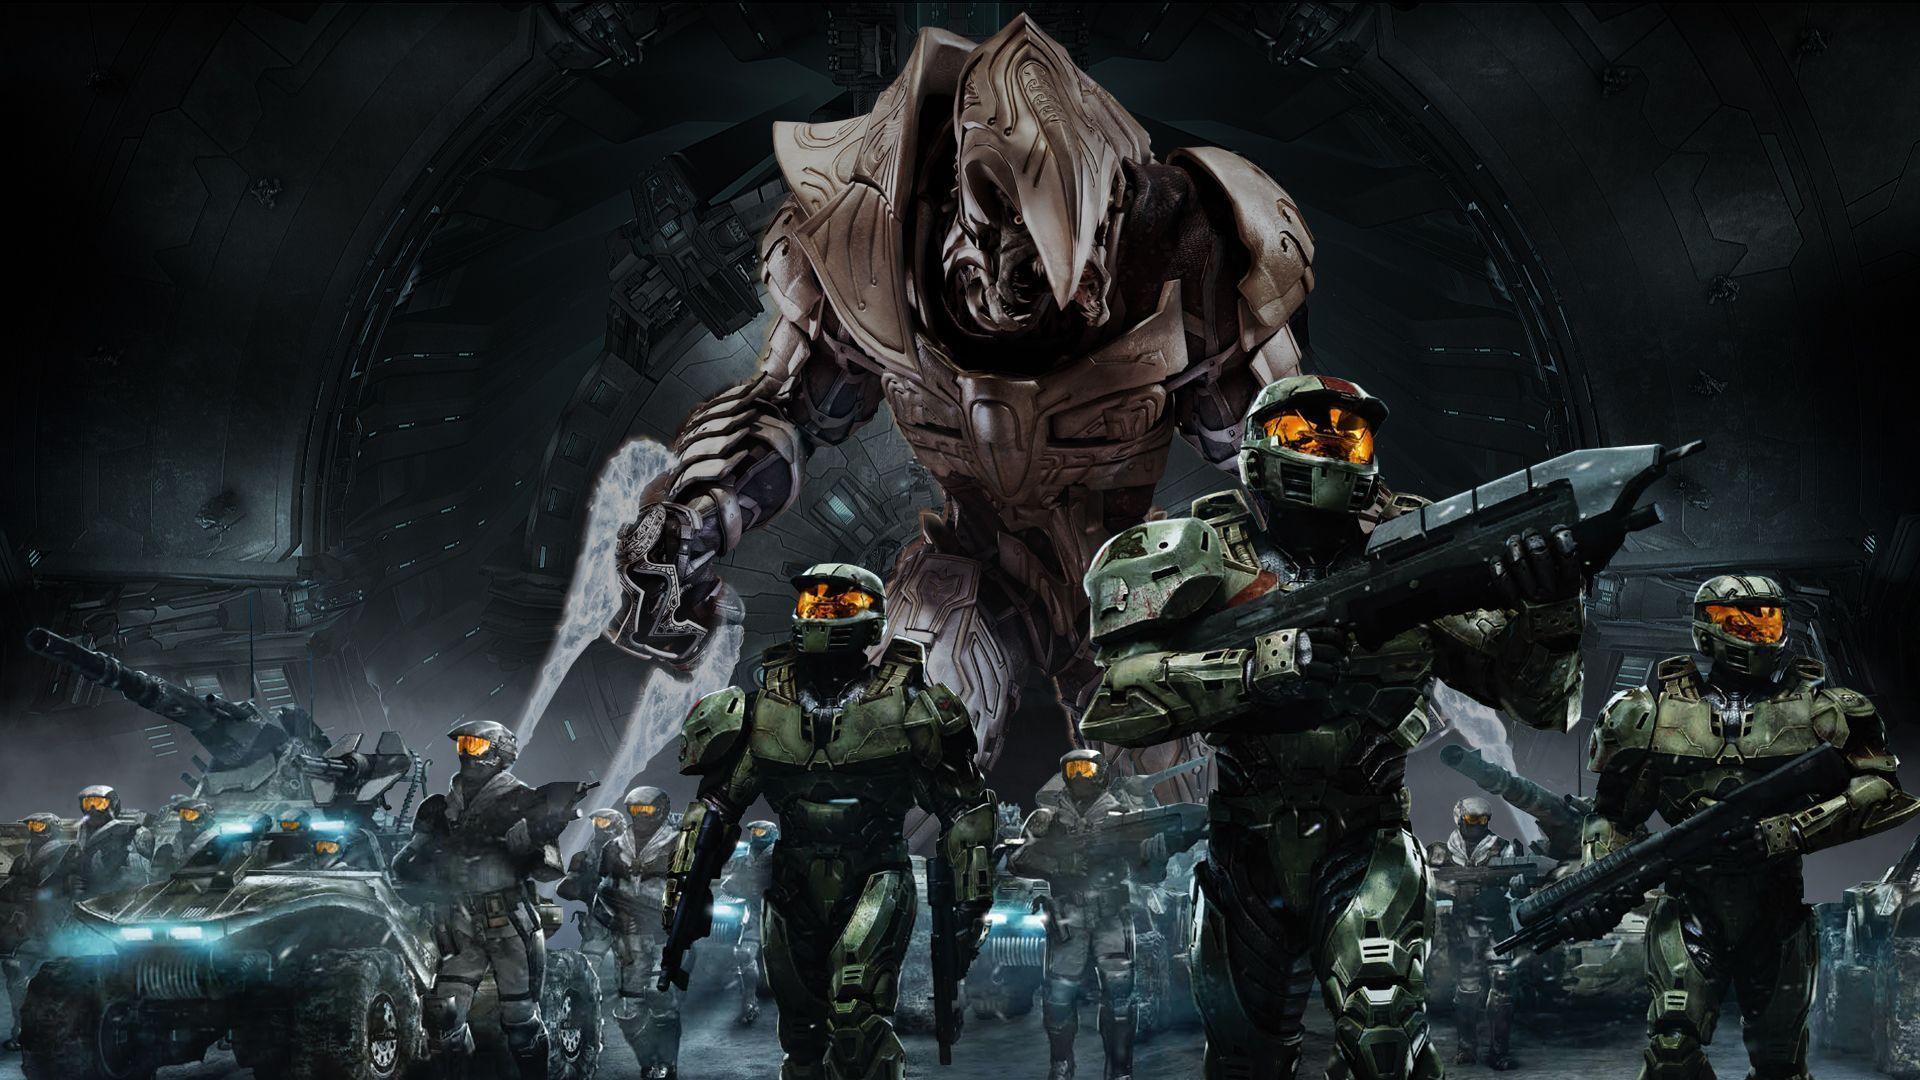 21 Halo 3 HD Wallpapers | Backgrounds - Wallpaper Abyss